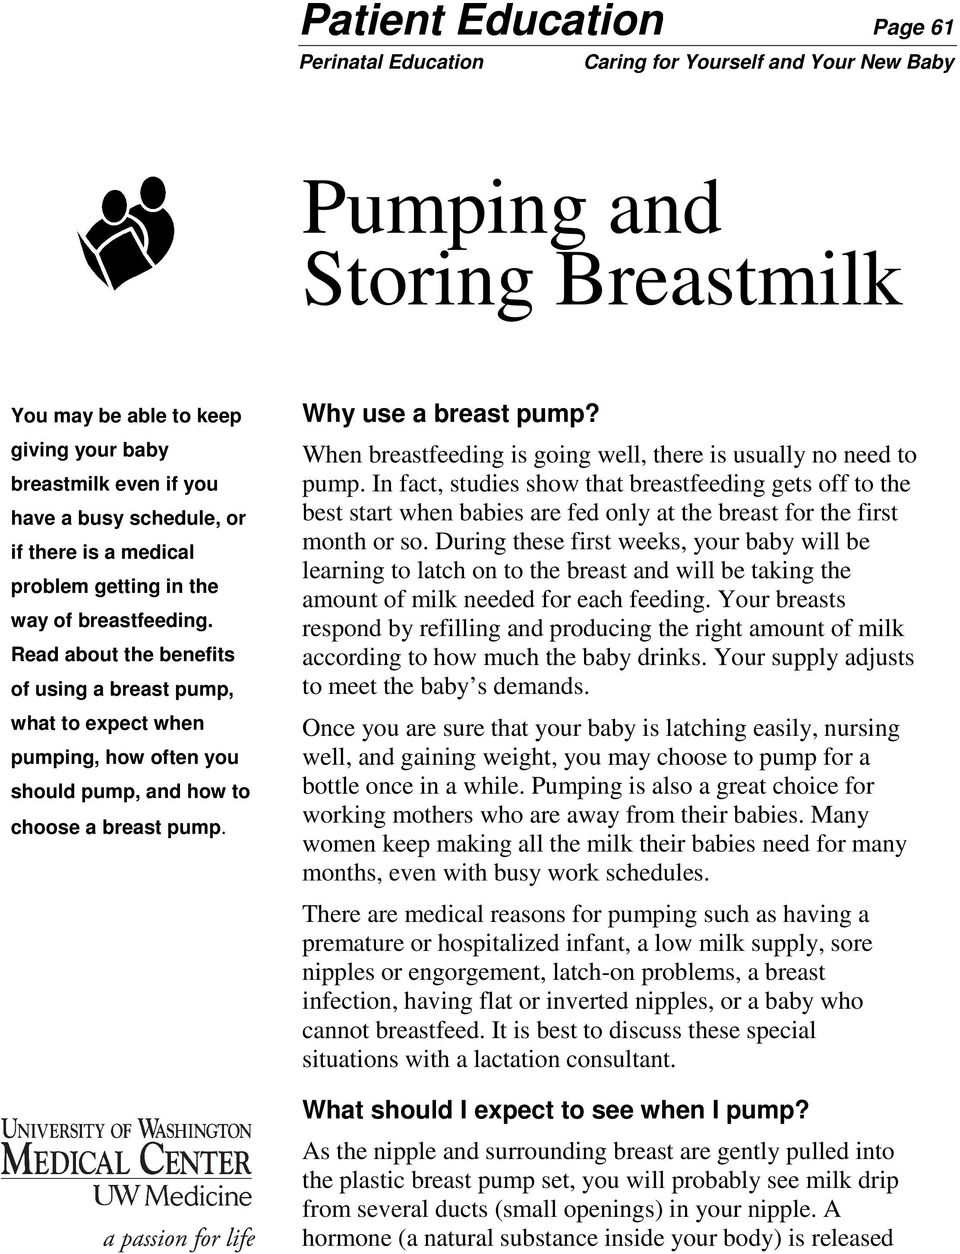 Why use a breast pump? When breastfeeding is going well, there is usually no need to pump.